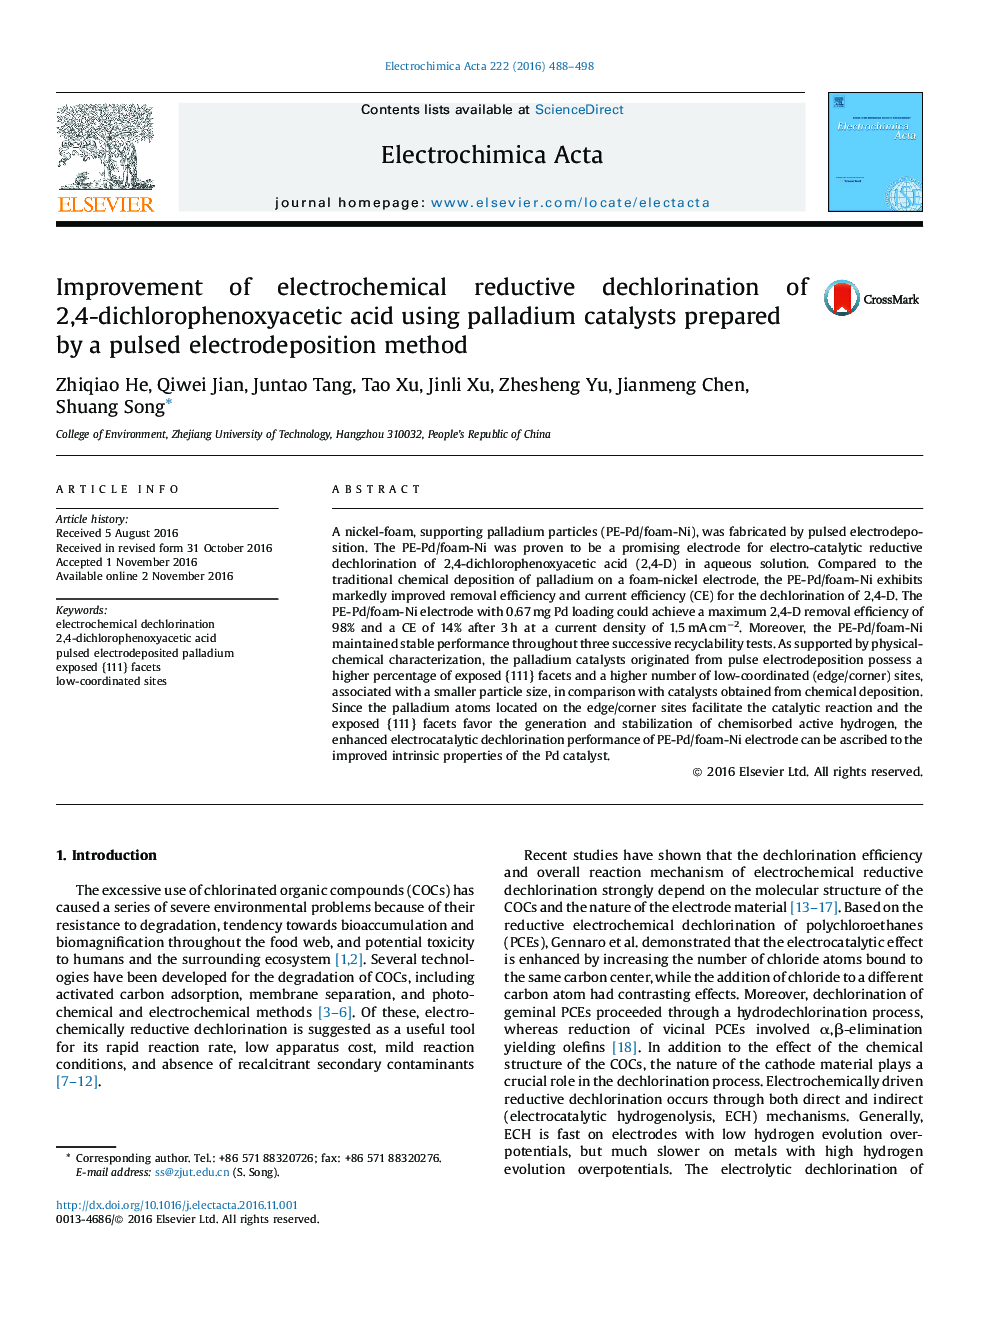 Improvement of electrochemical reductive dechlorination of 2,4-dichlorophenoxyacetic acid using palladium catalysts prepared by a pulsed electrodeposition method